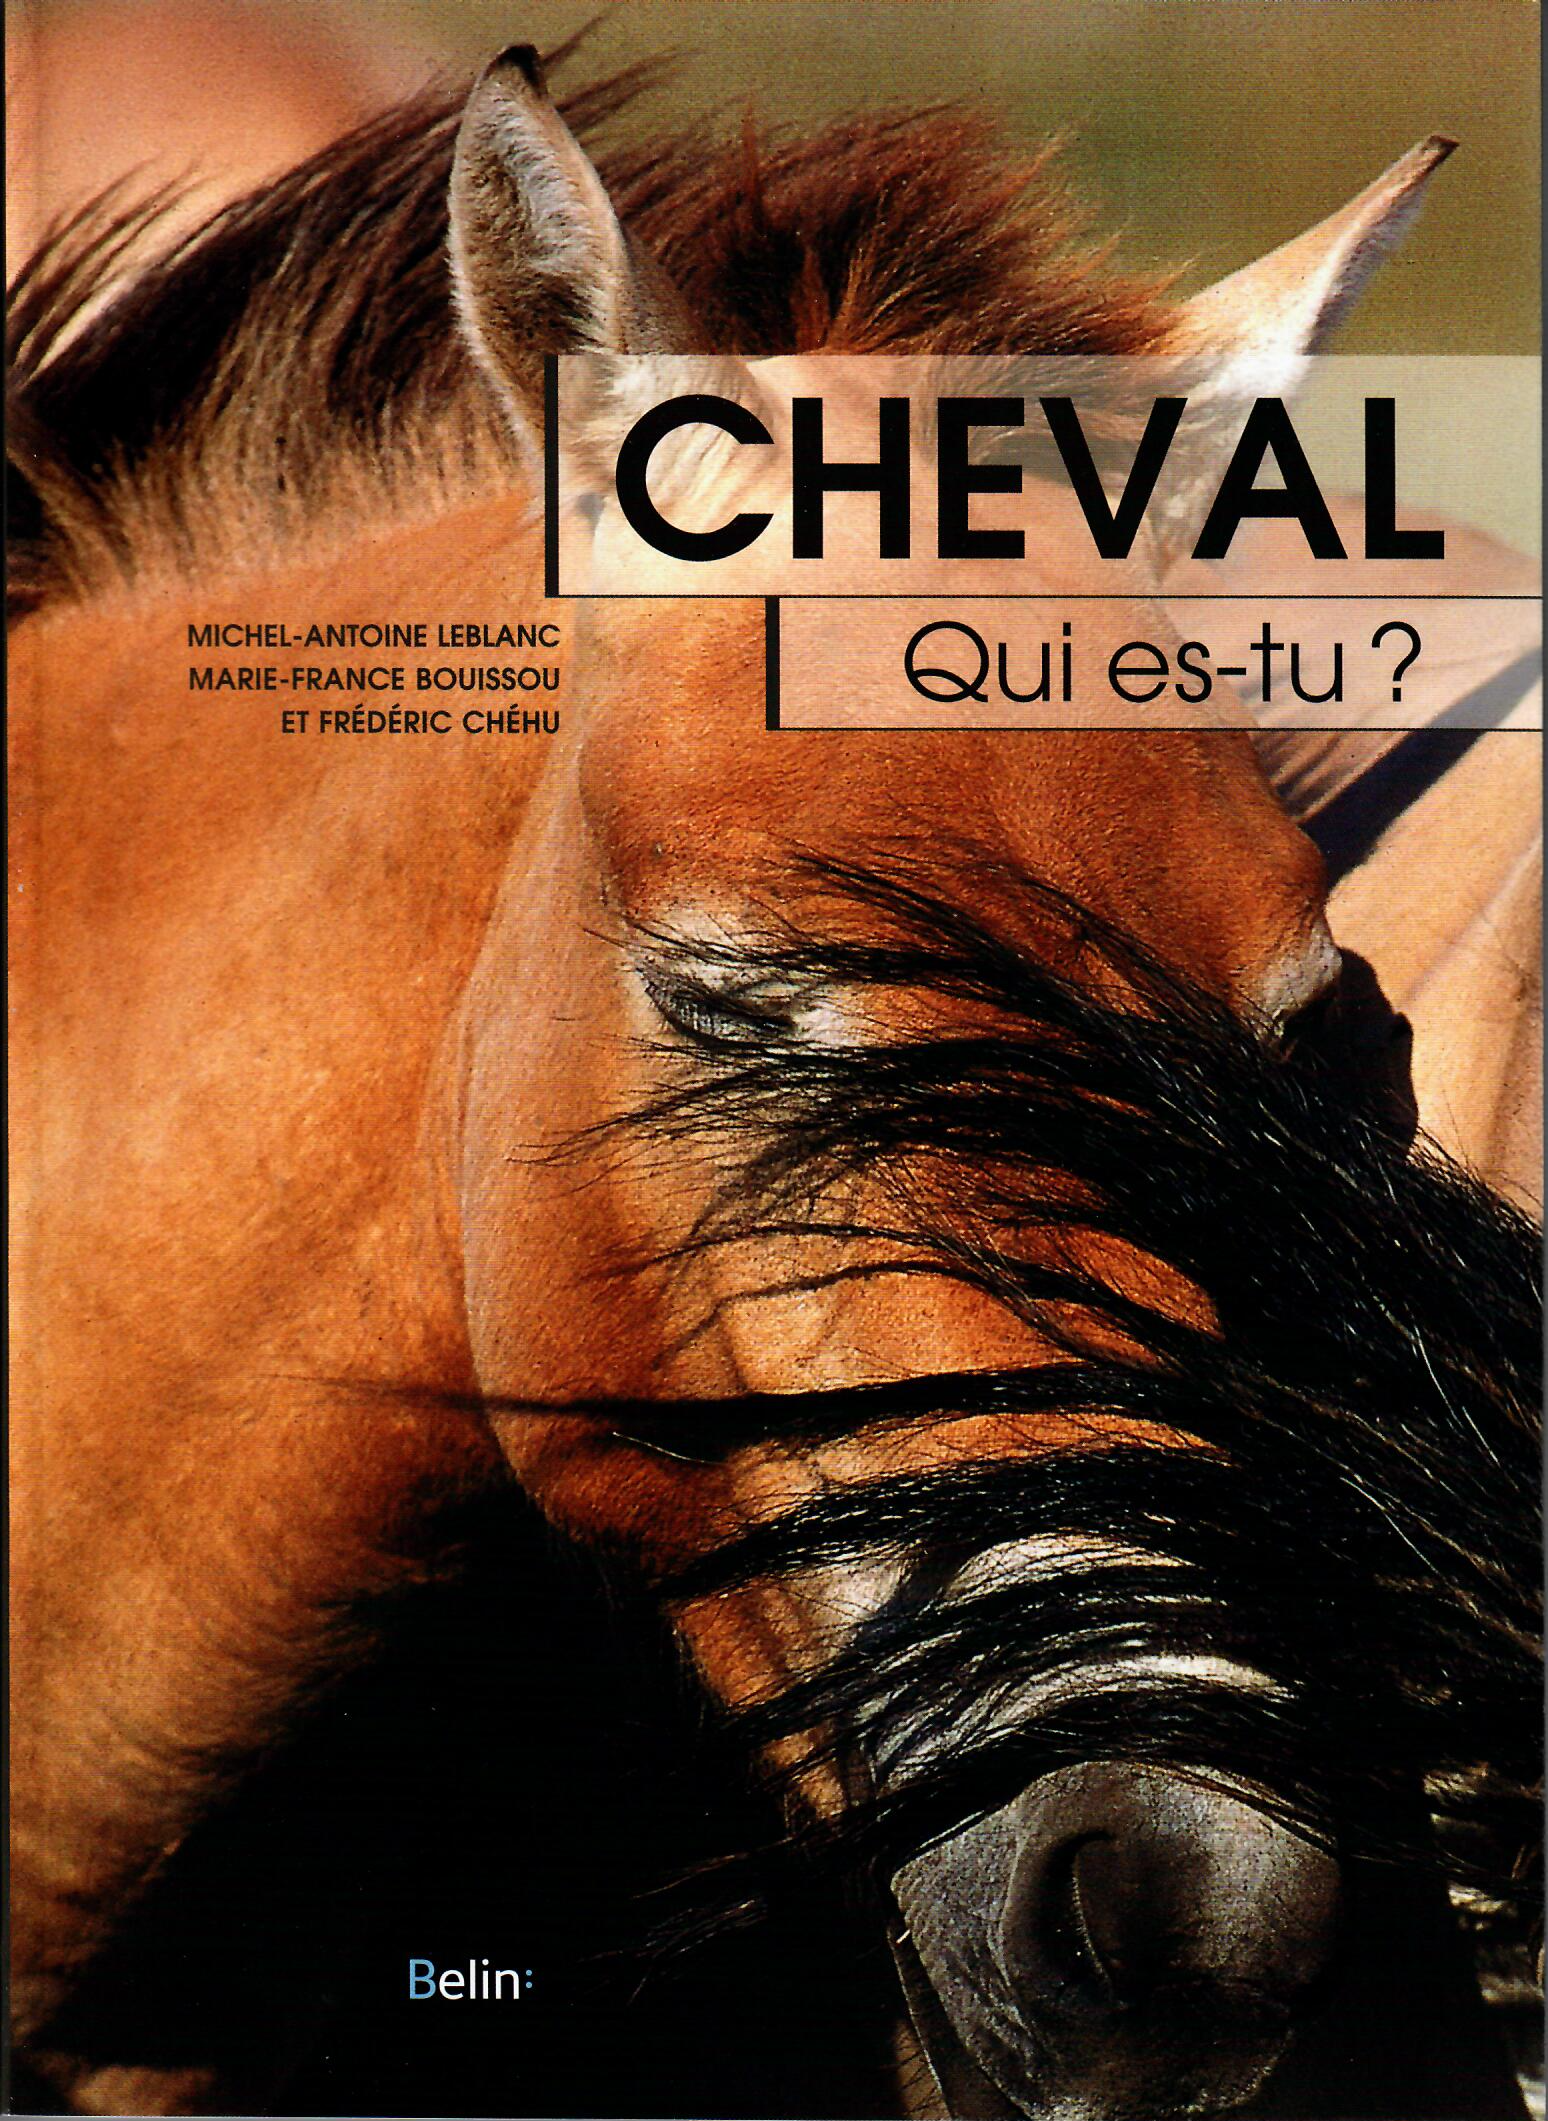 https://www.andybooth.fr/wp-content/uploads/2019/01/cheval-qui-es-tu.png